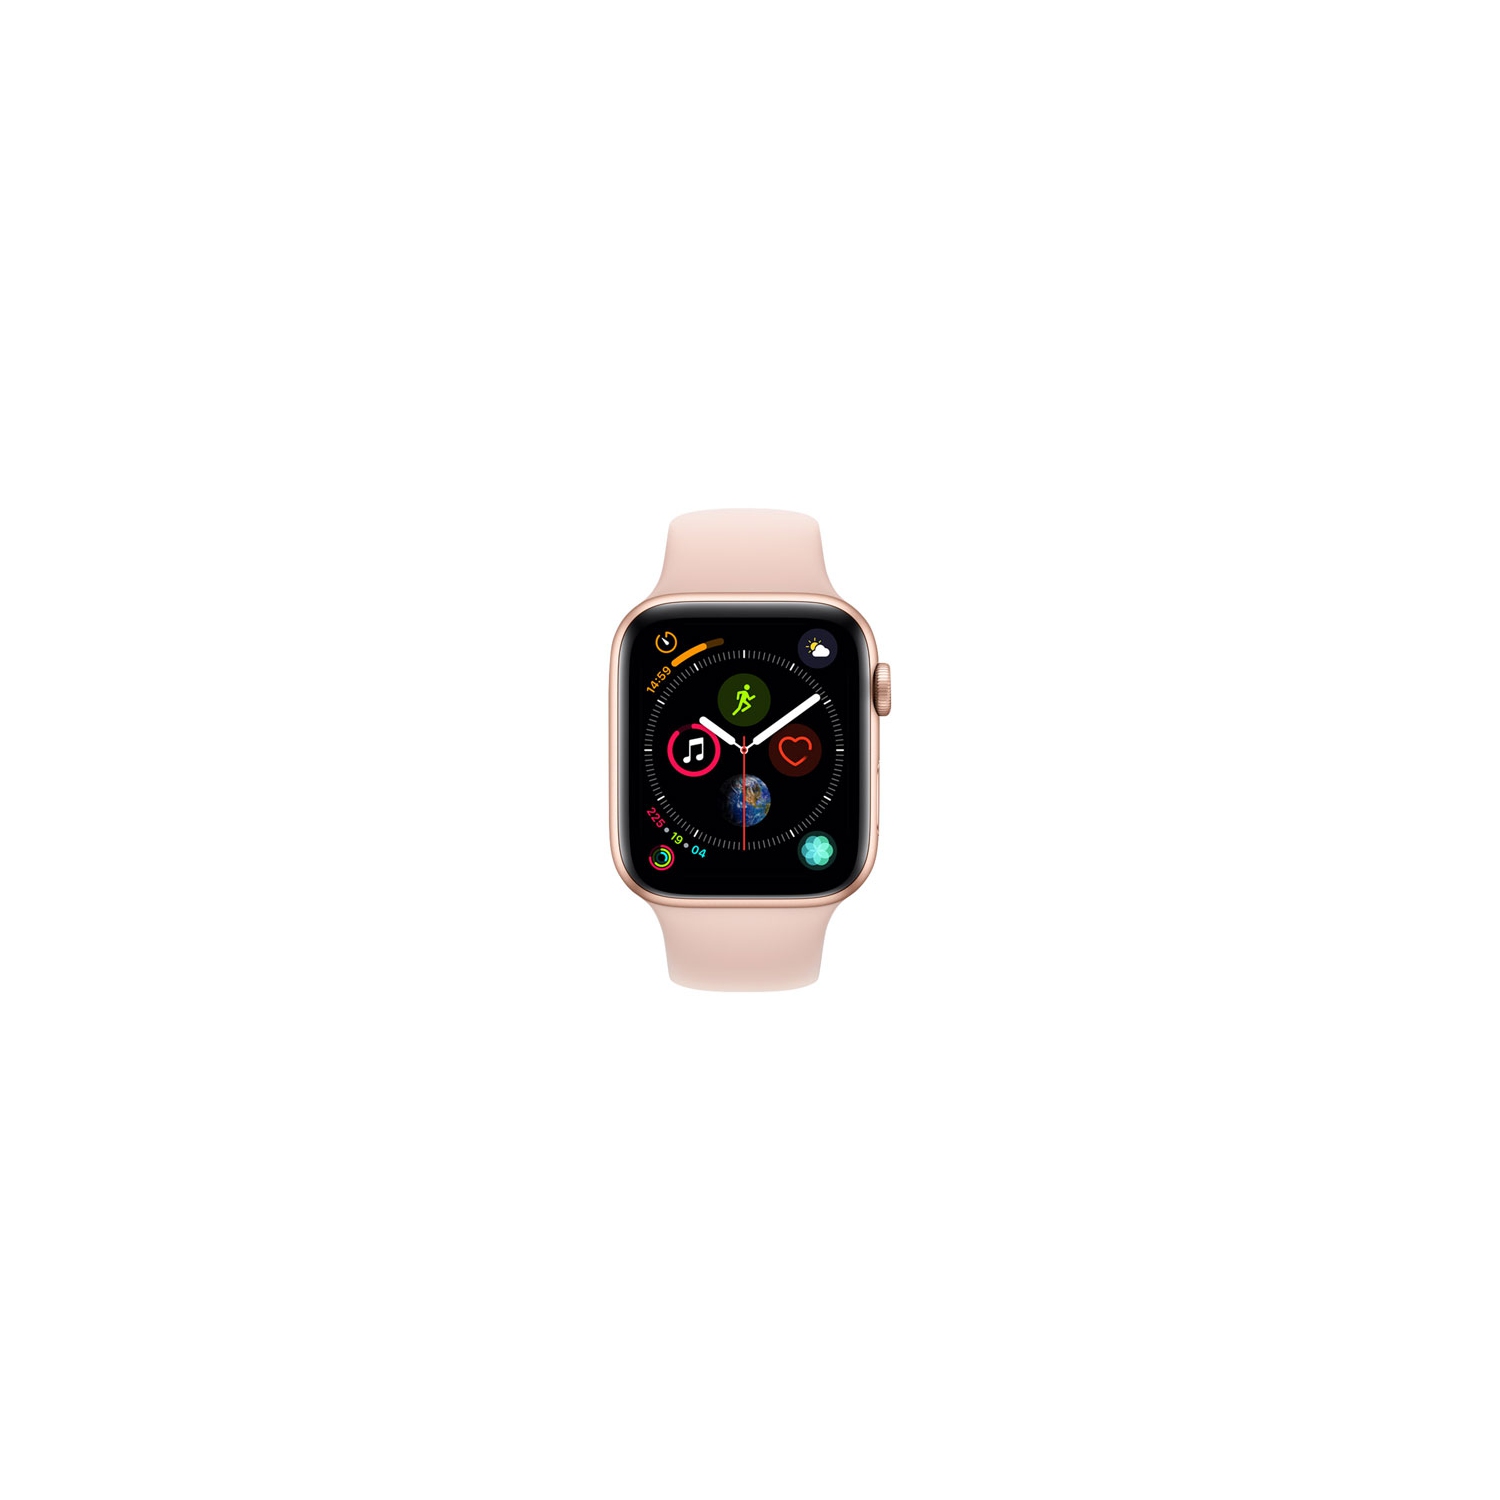 Apple Watch Series 4 (GPS + Cellular) 44mm Gold Aluminum Case with Pink Sand Sport Band - Open Box